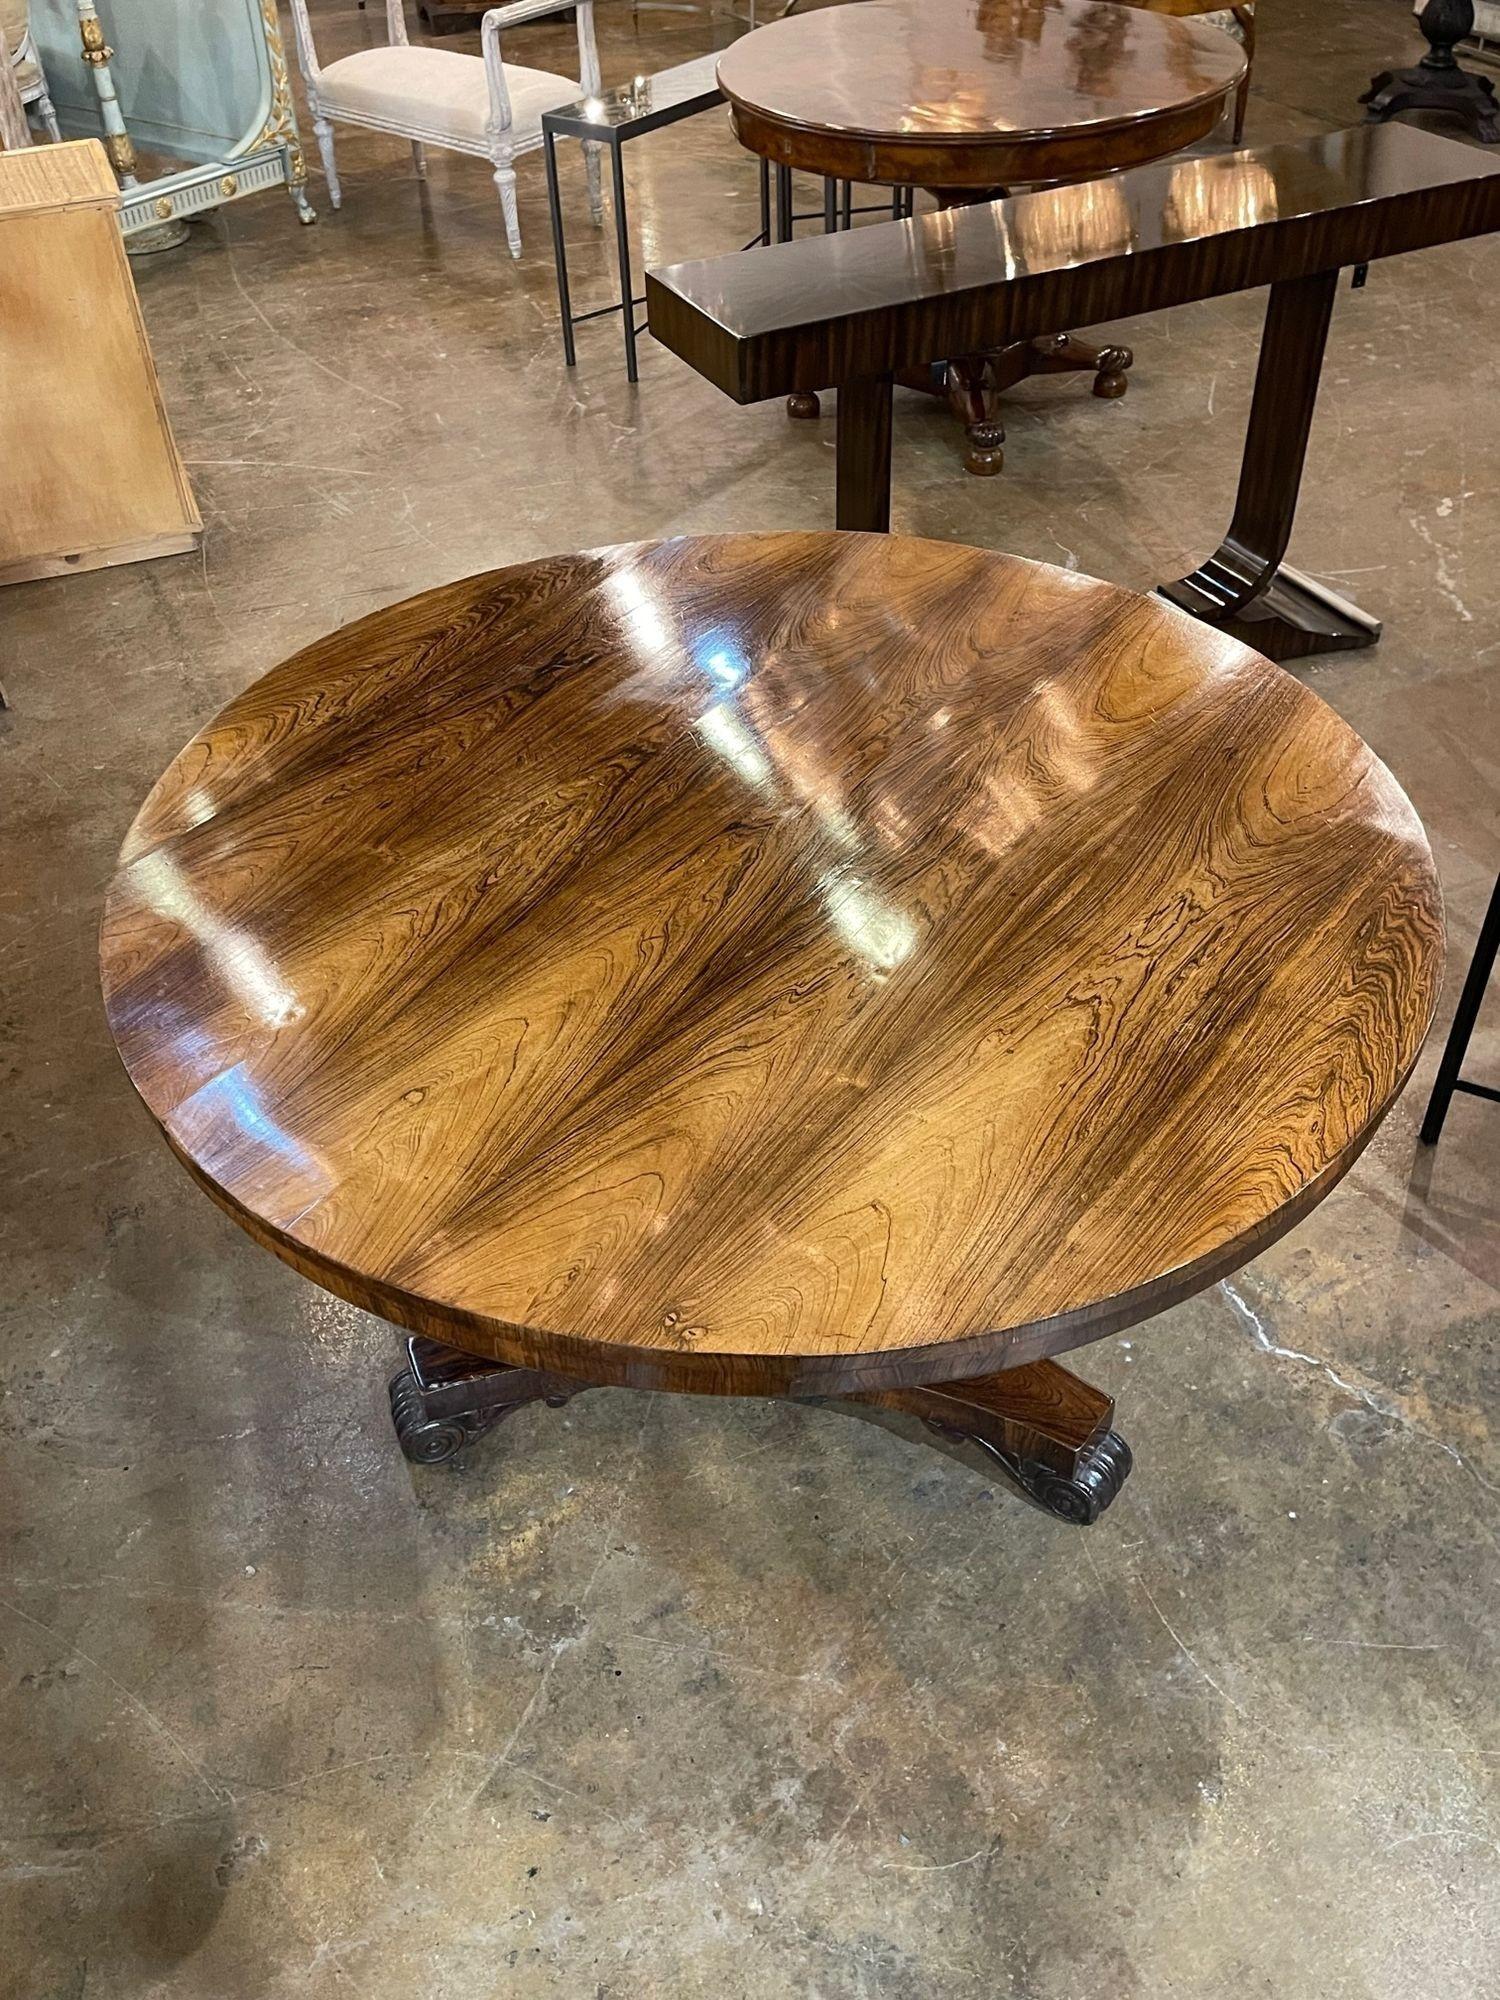 Very fine 19th century English Regency style Rosewood center table. This piece has a gorgeous polished finish. A super elegant table!